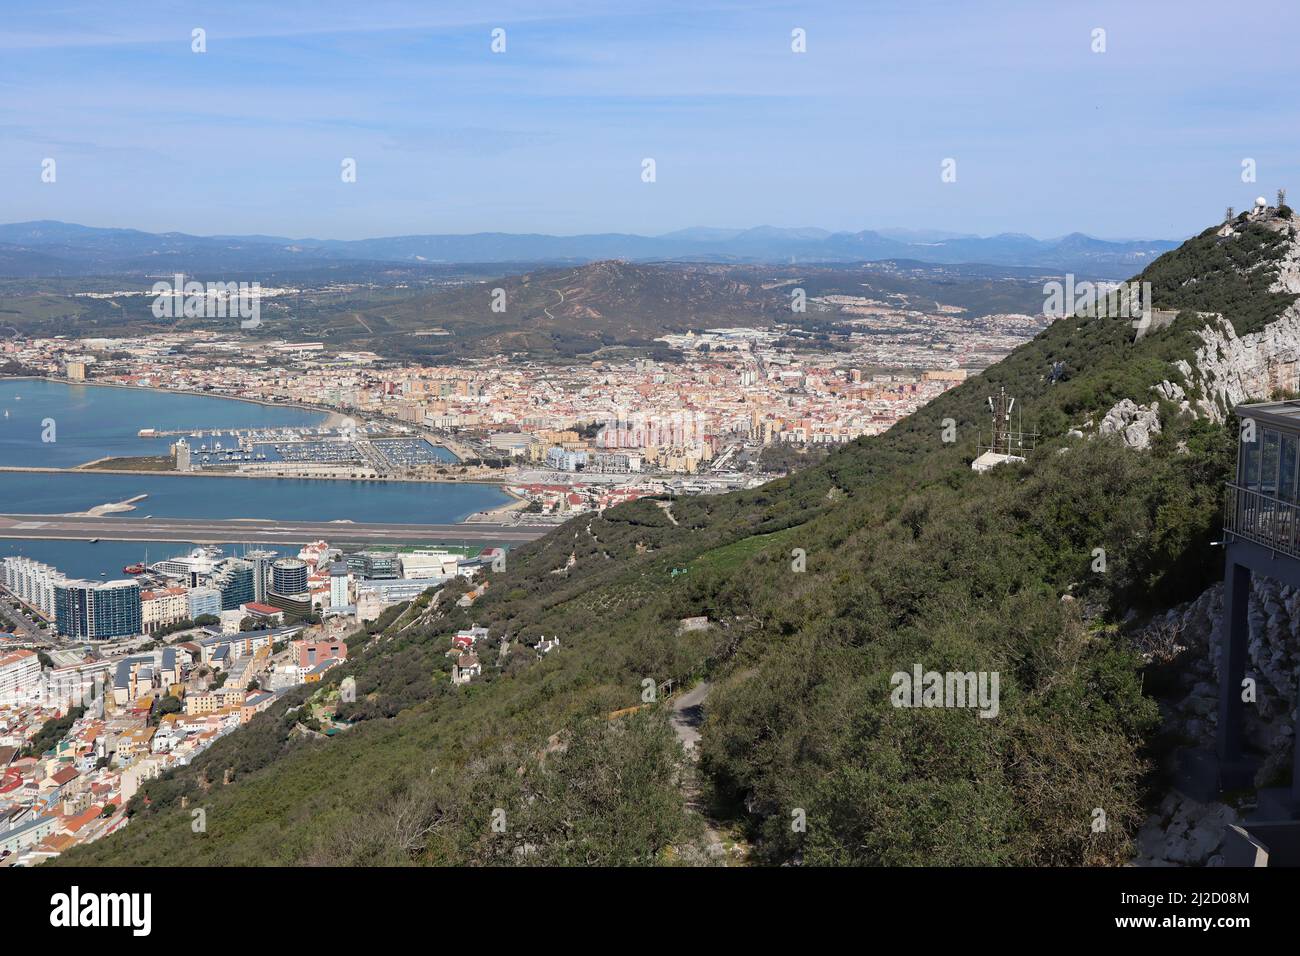 Panoramic view over Gibraltar harbour from the top of the Rock of Gibraltar. The airport runway juts out into the water. Stock Photo